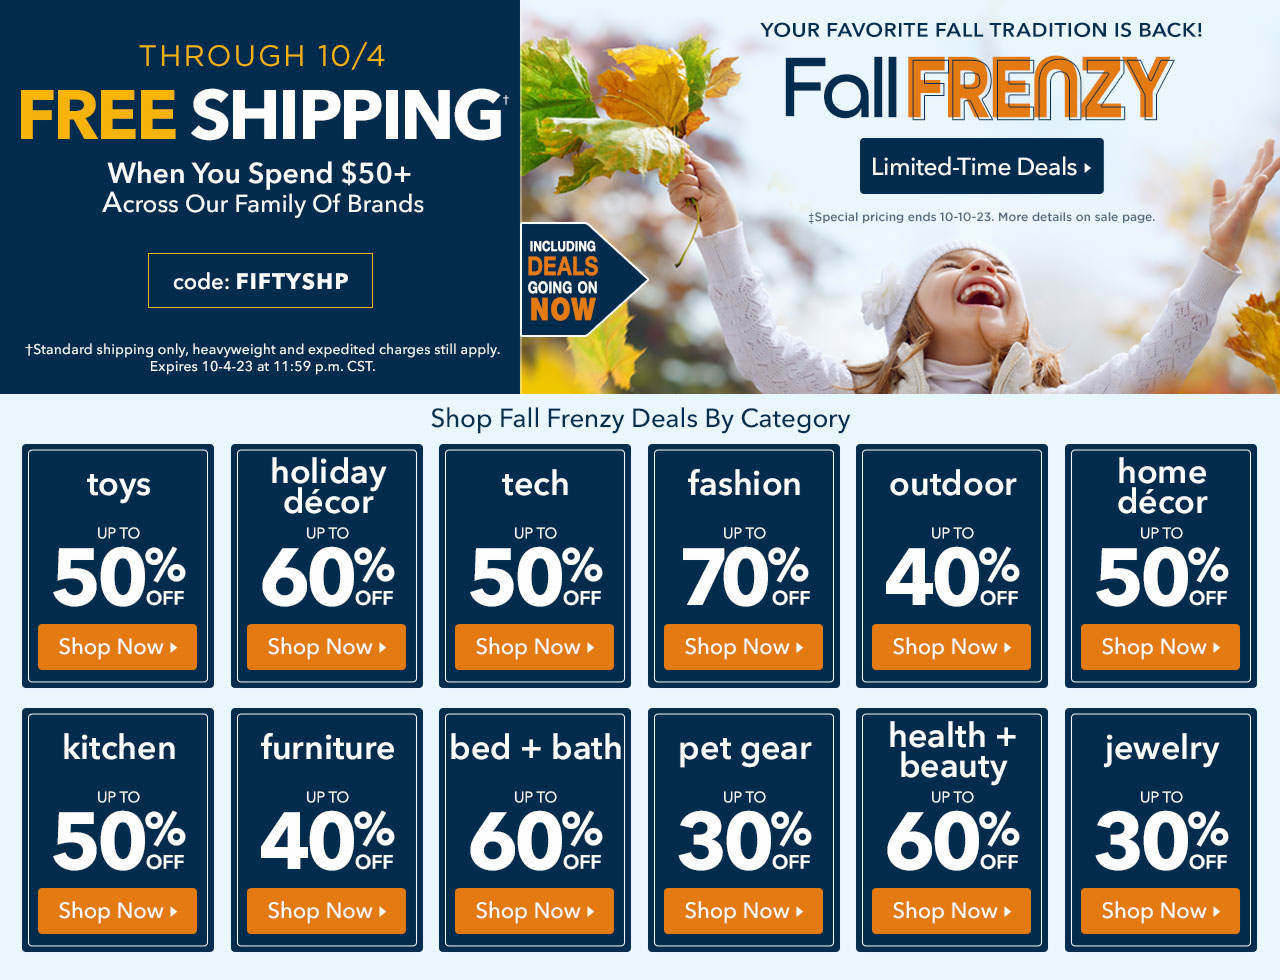 Discover limited-time markdowns on hundreds of  deals. Plus through October 4th, enjoy free shipping on orders of $50 or more across our family of brands with code FIFTYSHP.